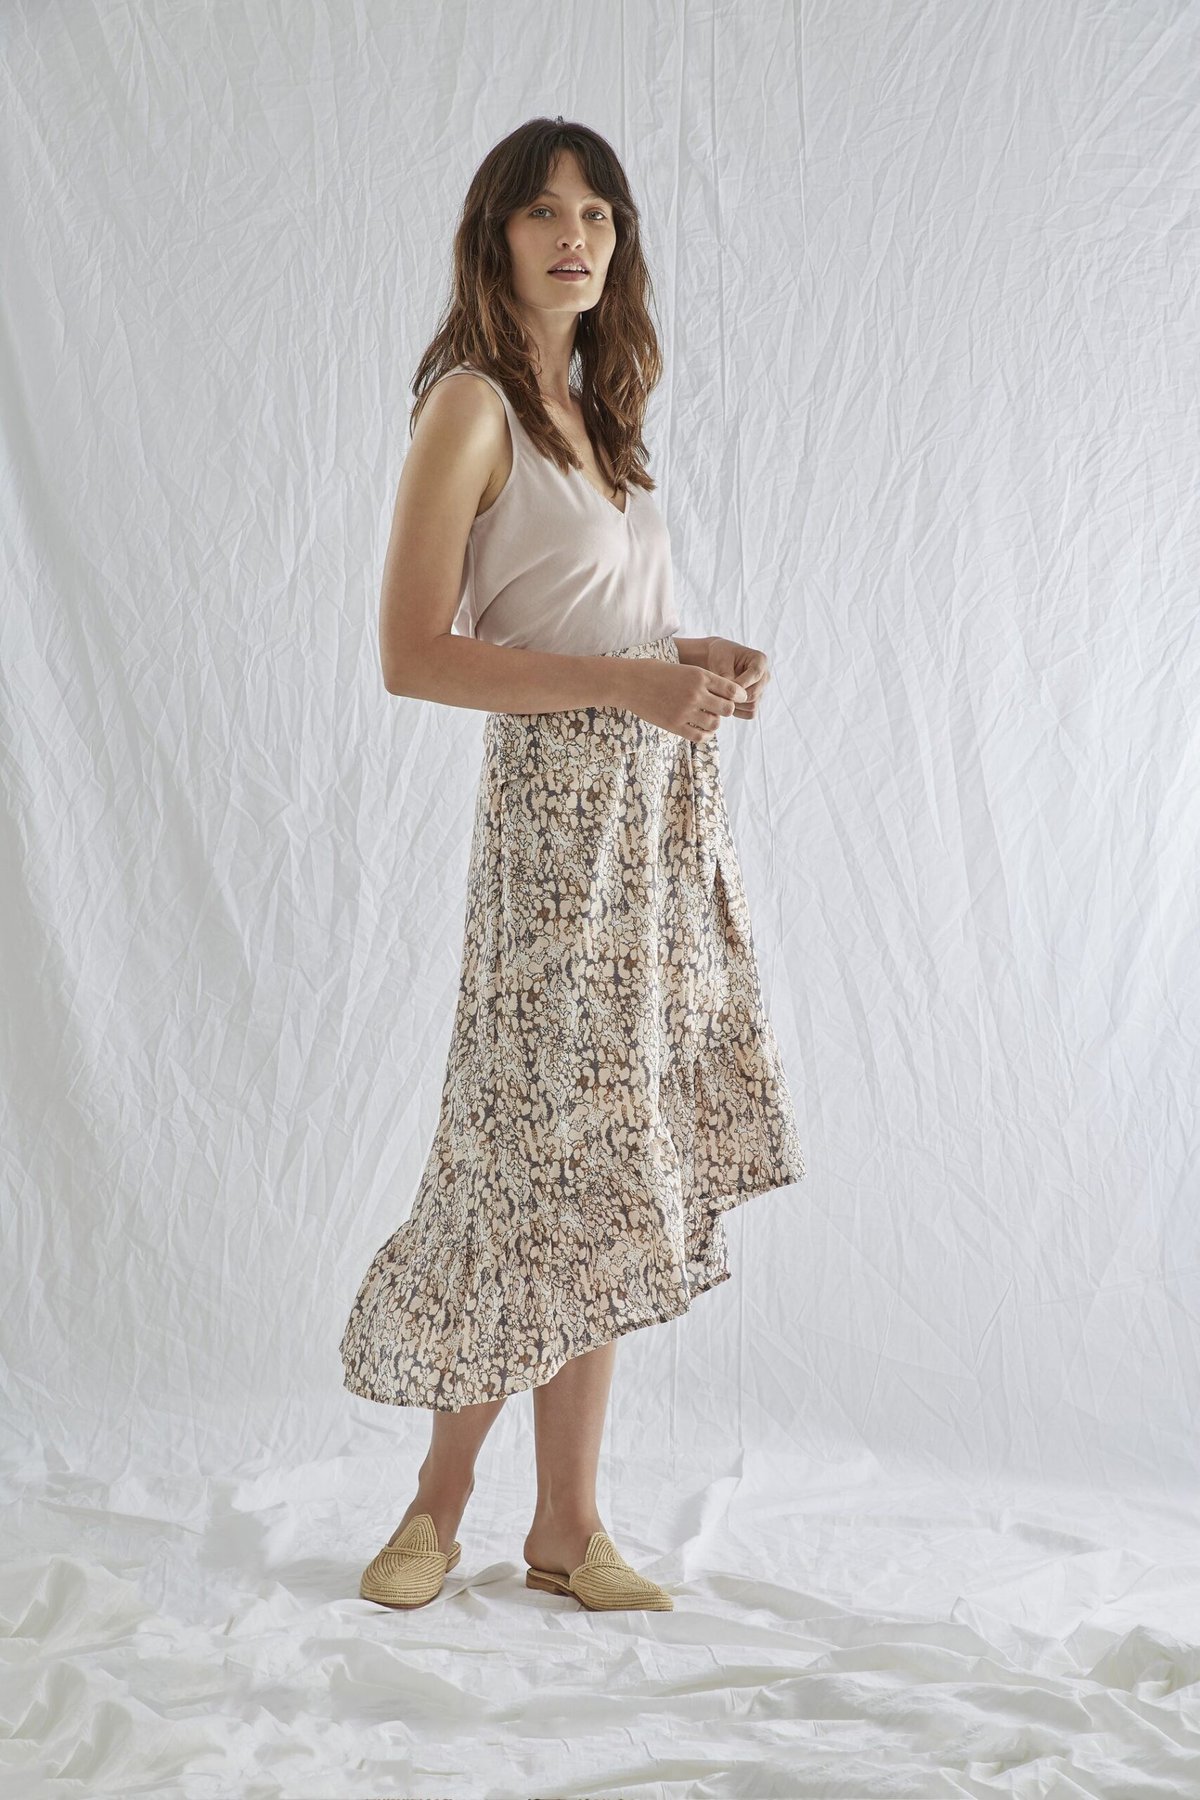 sabatini lookbook photography white top patterned flowy skirt